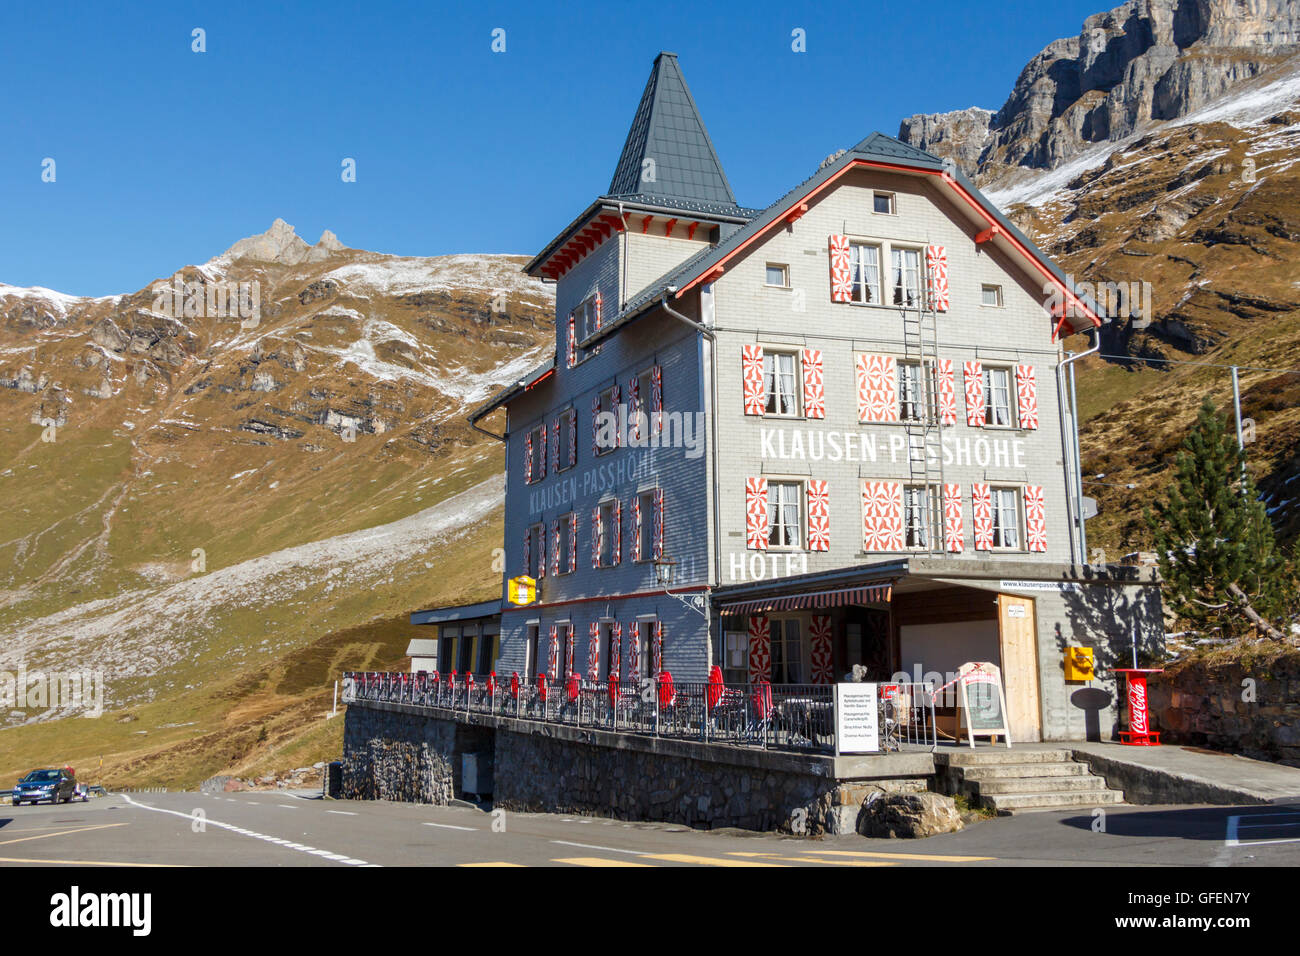 An authentic, remote hotel on the Klausenpass in Switzerland. Stock Photo